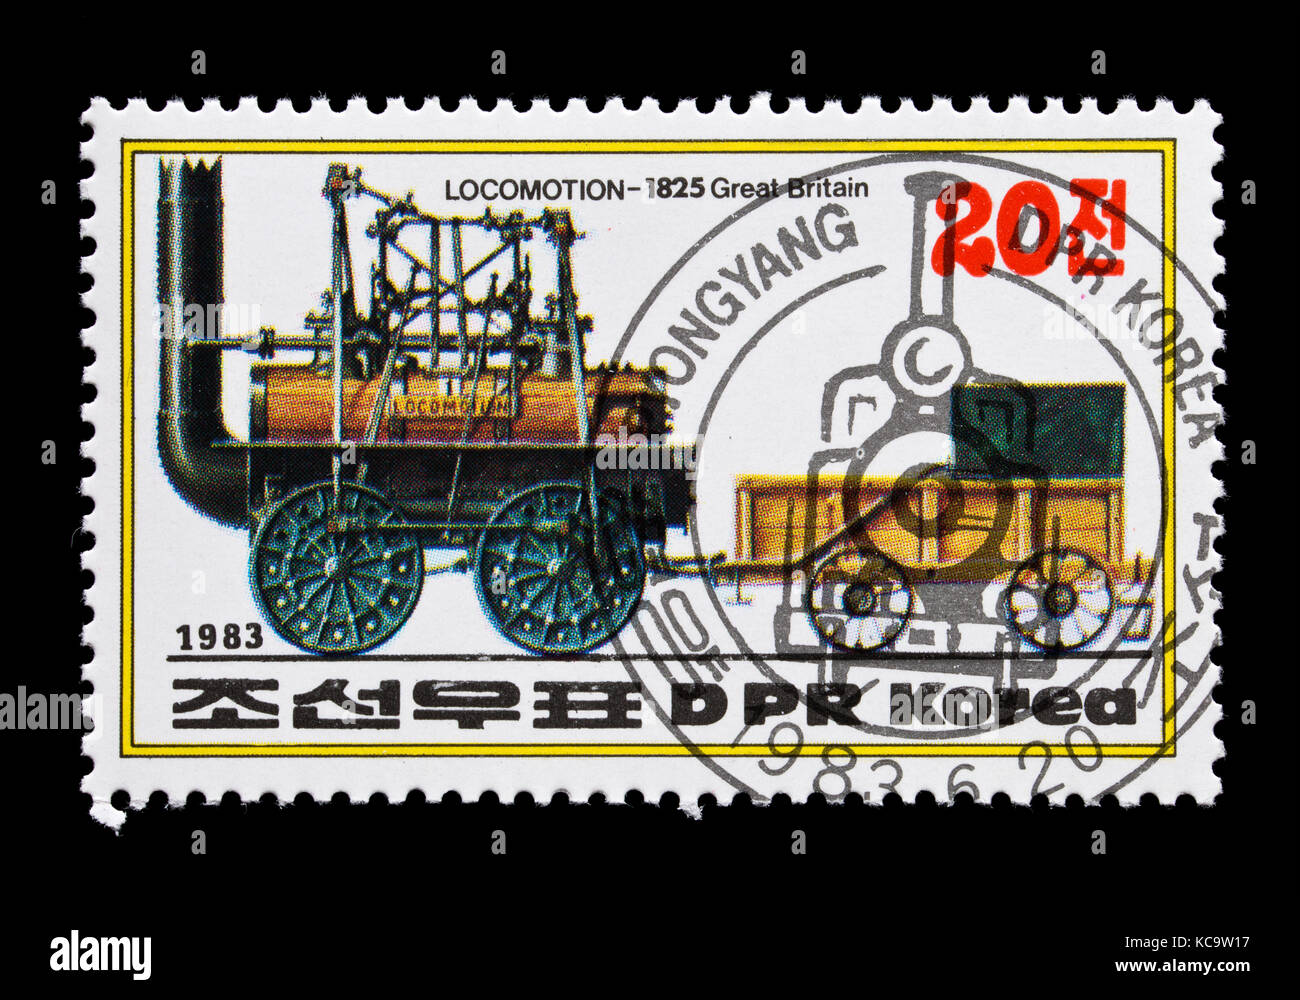 Postage stamp from North Korea depicting the 1825 British steam engine Locomotion. Stock Photo